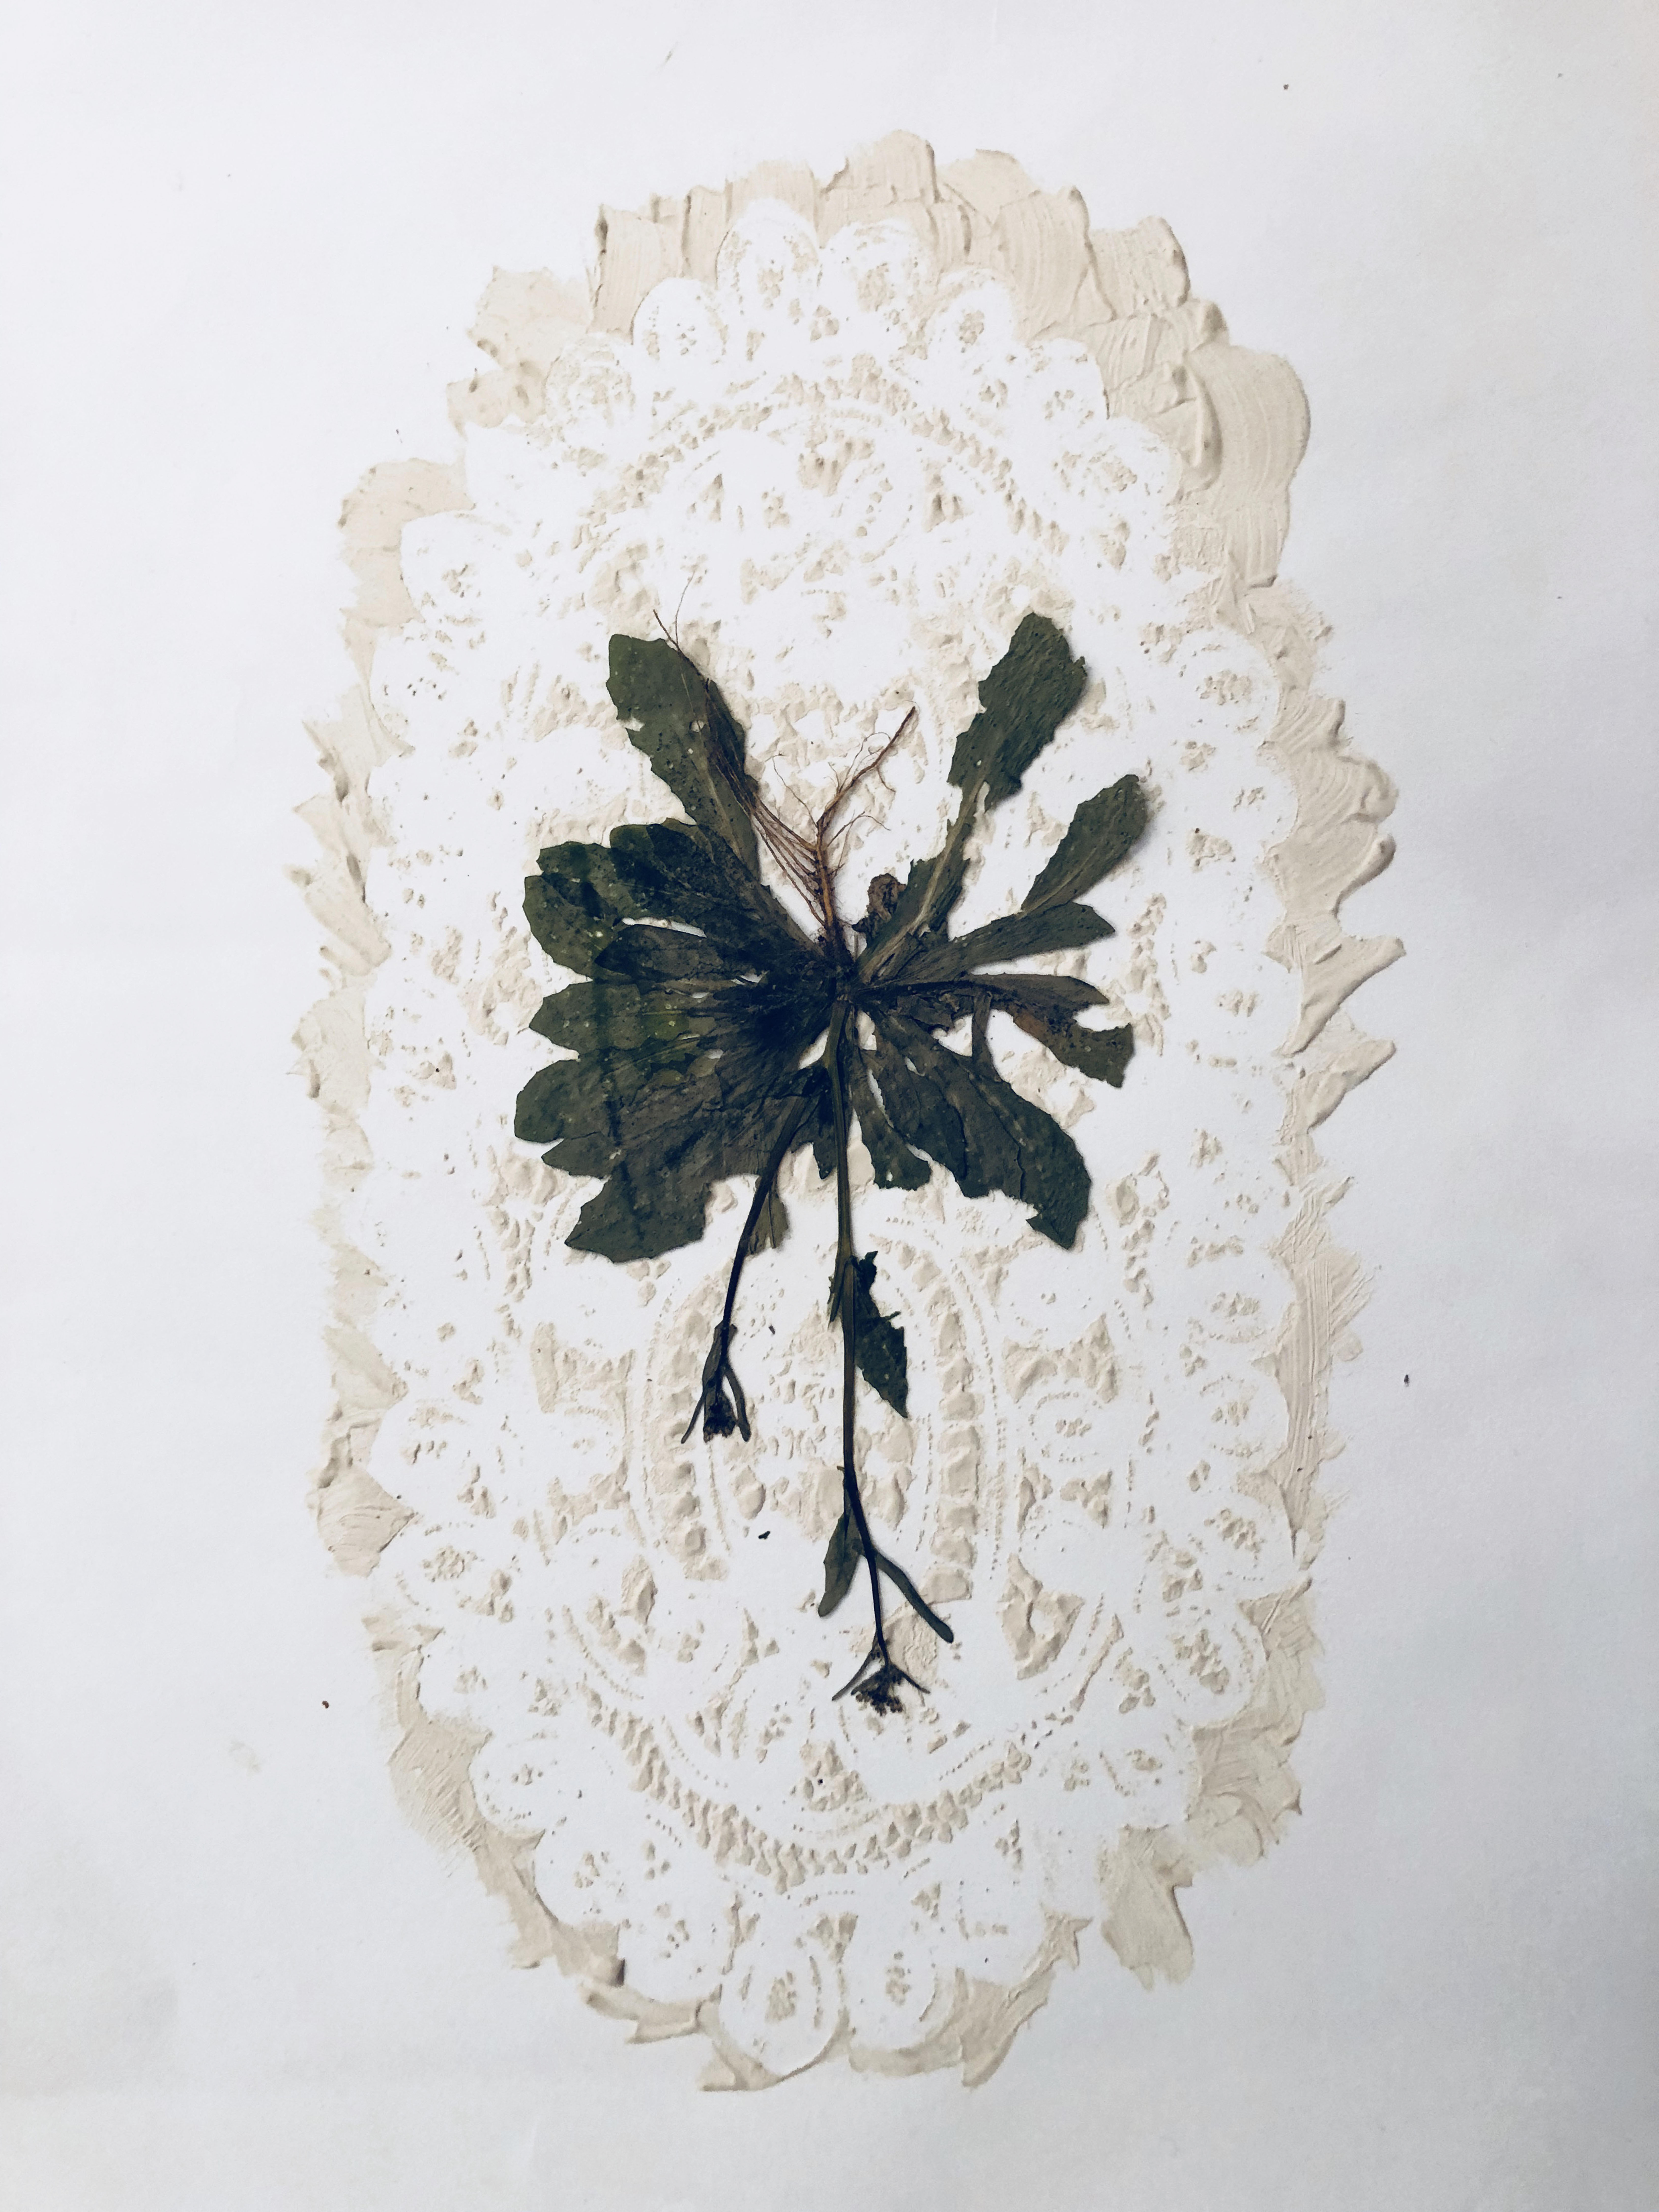 Jil Weinstock, Unwanted Collaborator (white latex and green flower), 2020, Plant life, white latex and rag paper, 30 x 22 inches